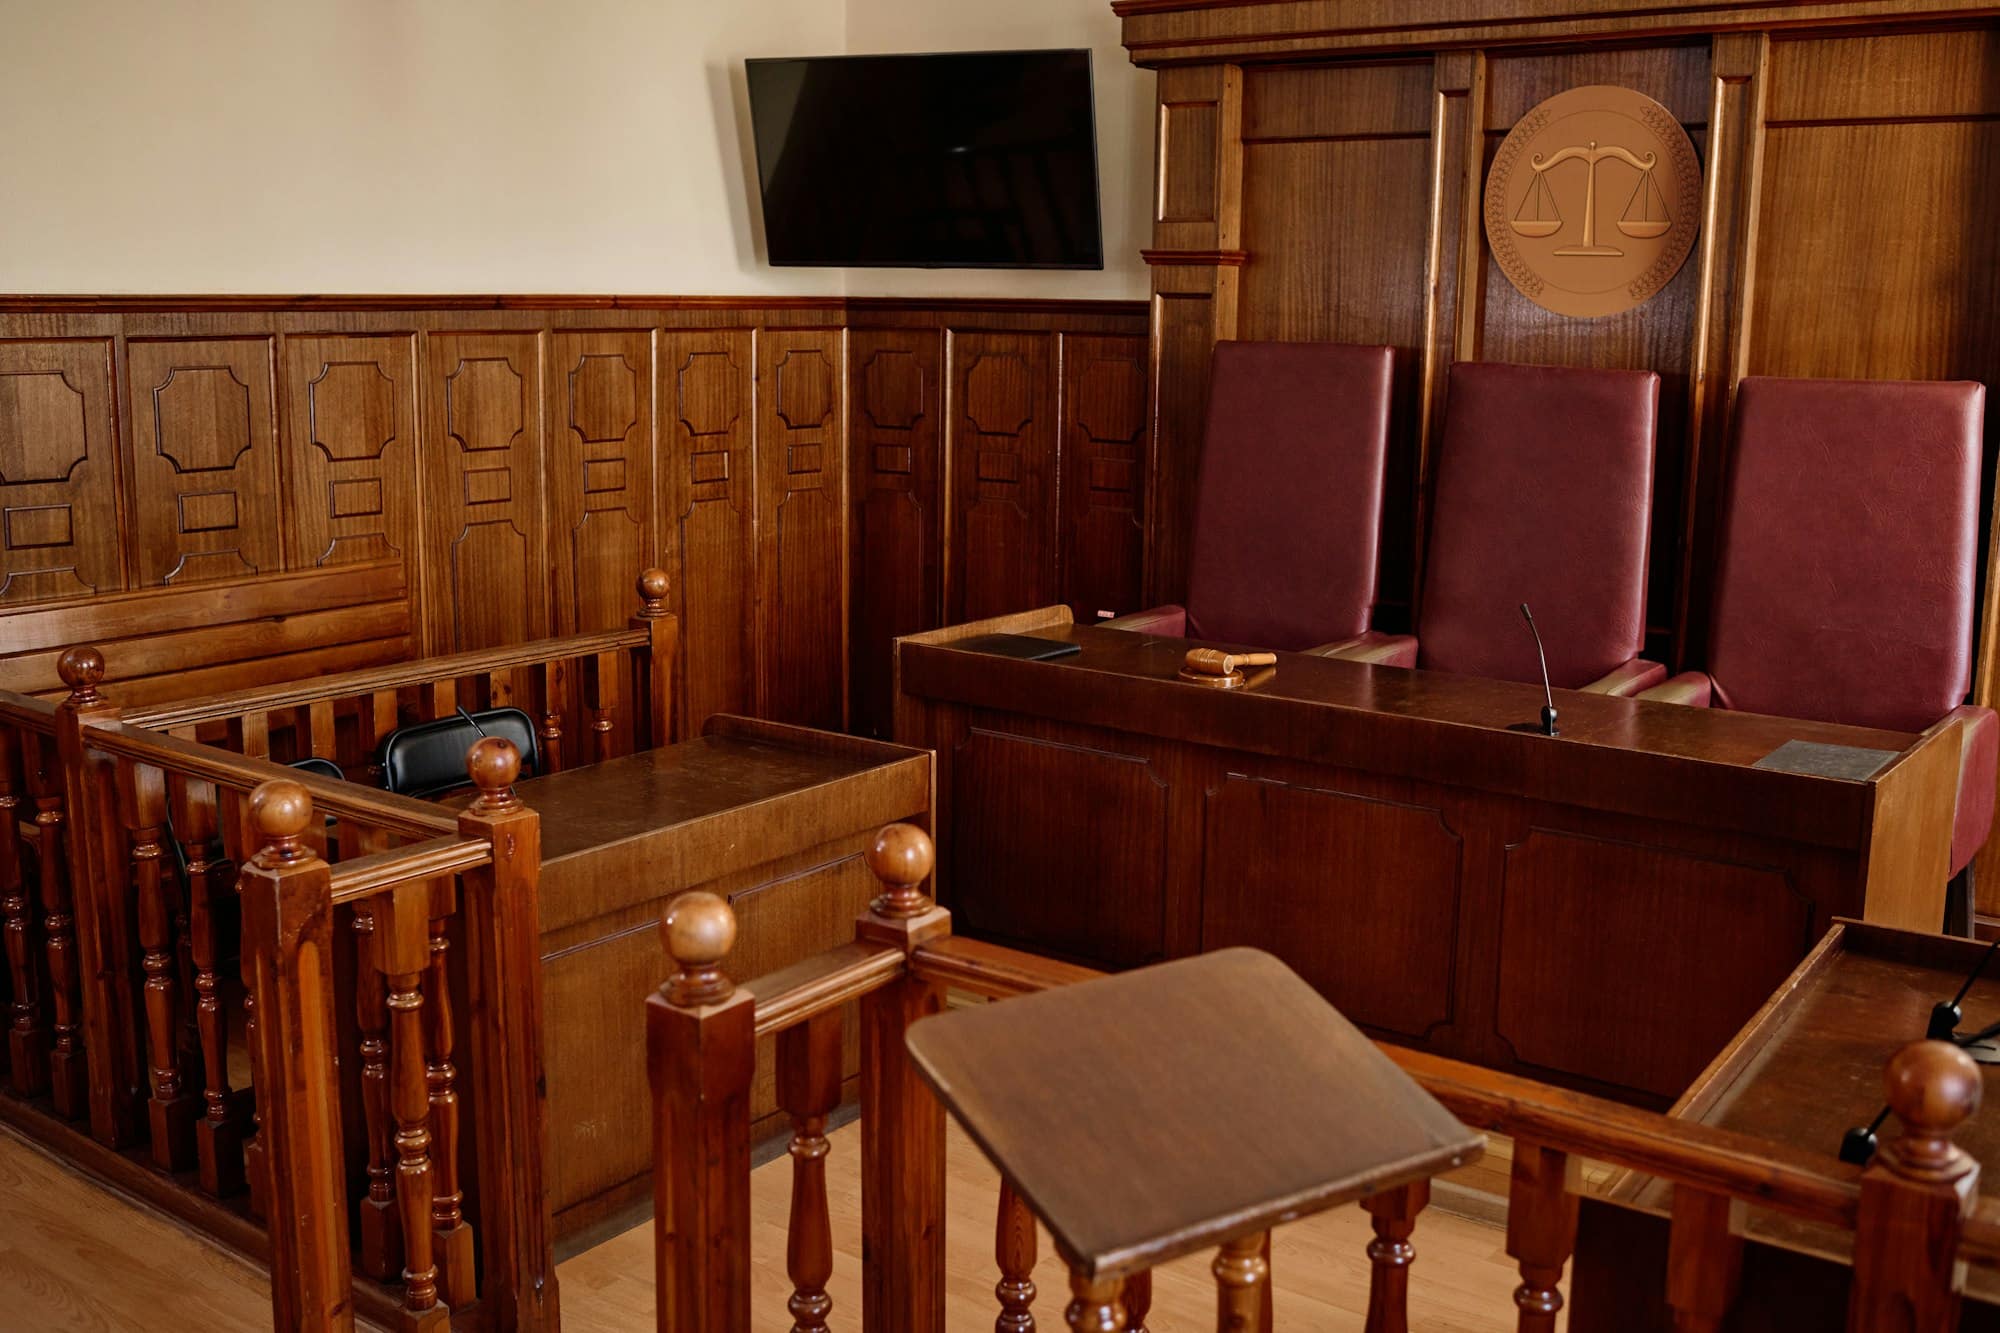 https://williamsattorneyatlaw.com/wp-content/uploads/2024/03/corner-of-courtroom-with-wooden-desks-and-railings-and-leather-chairs.jpg